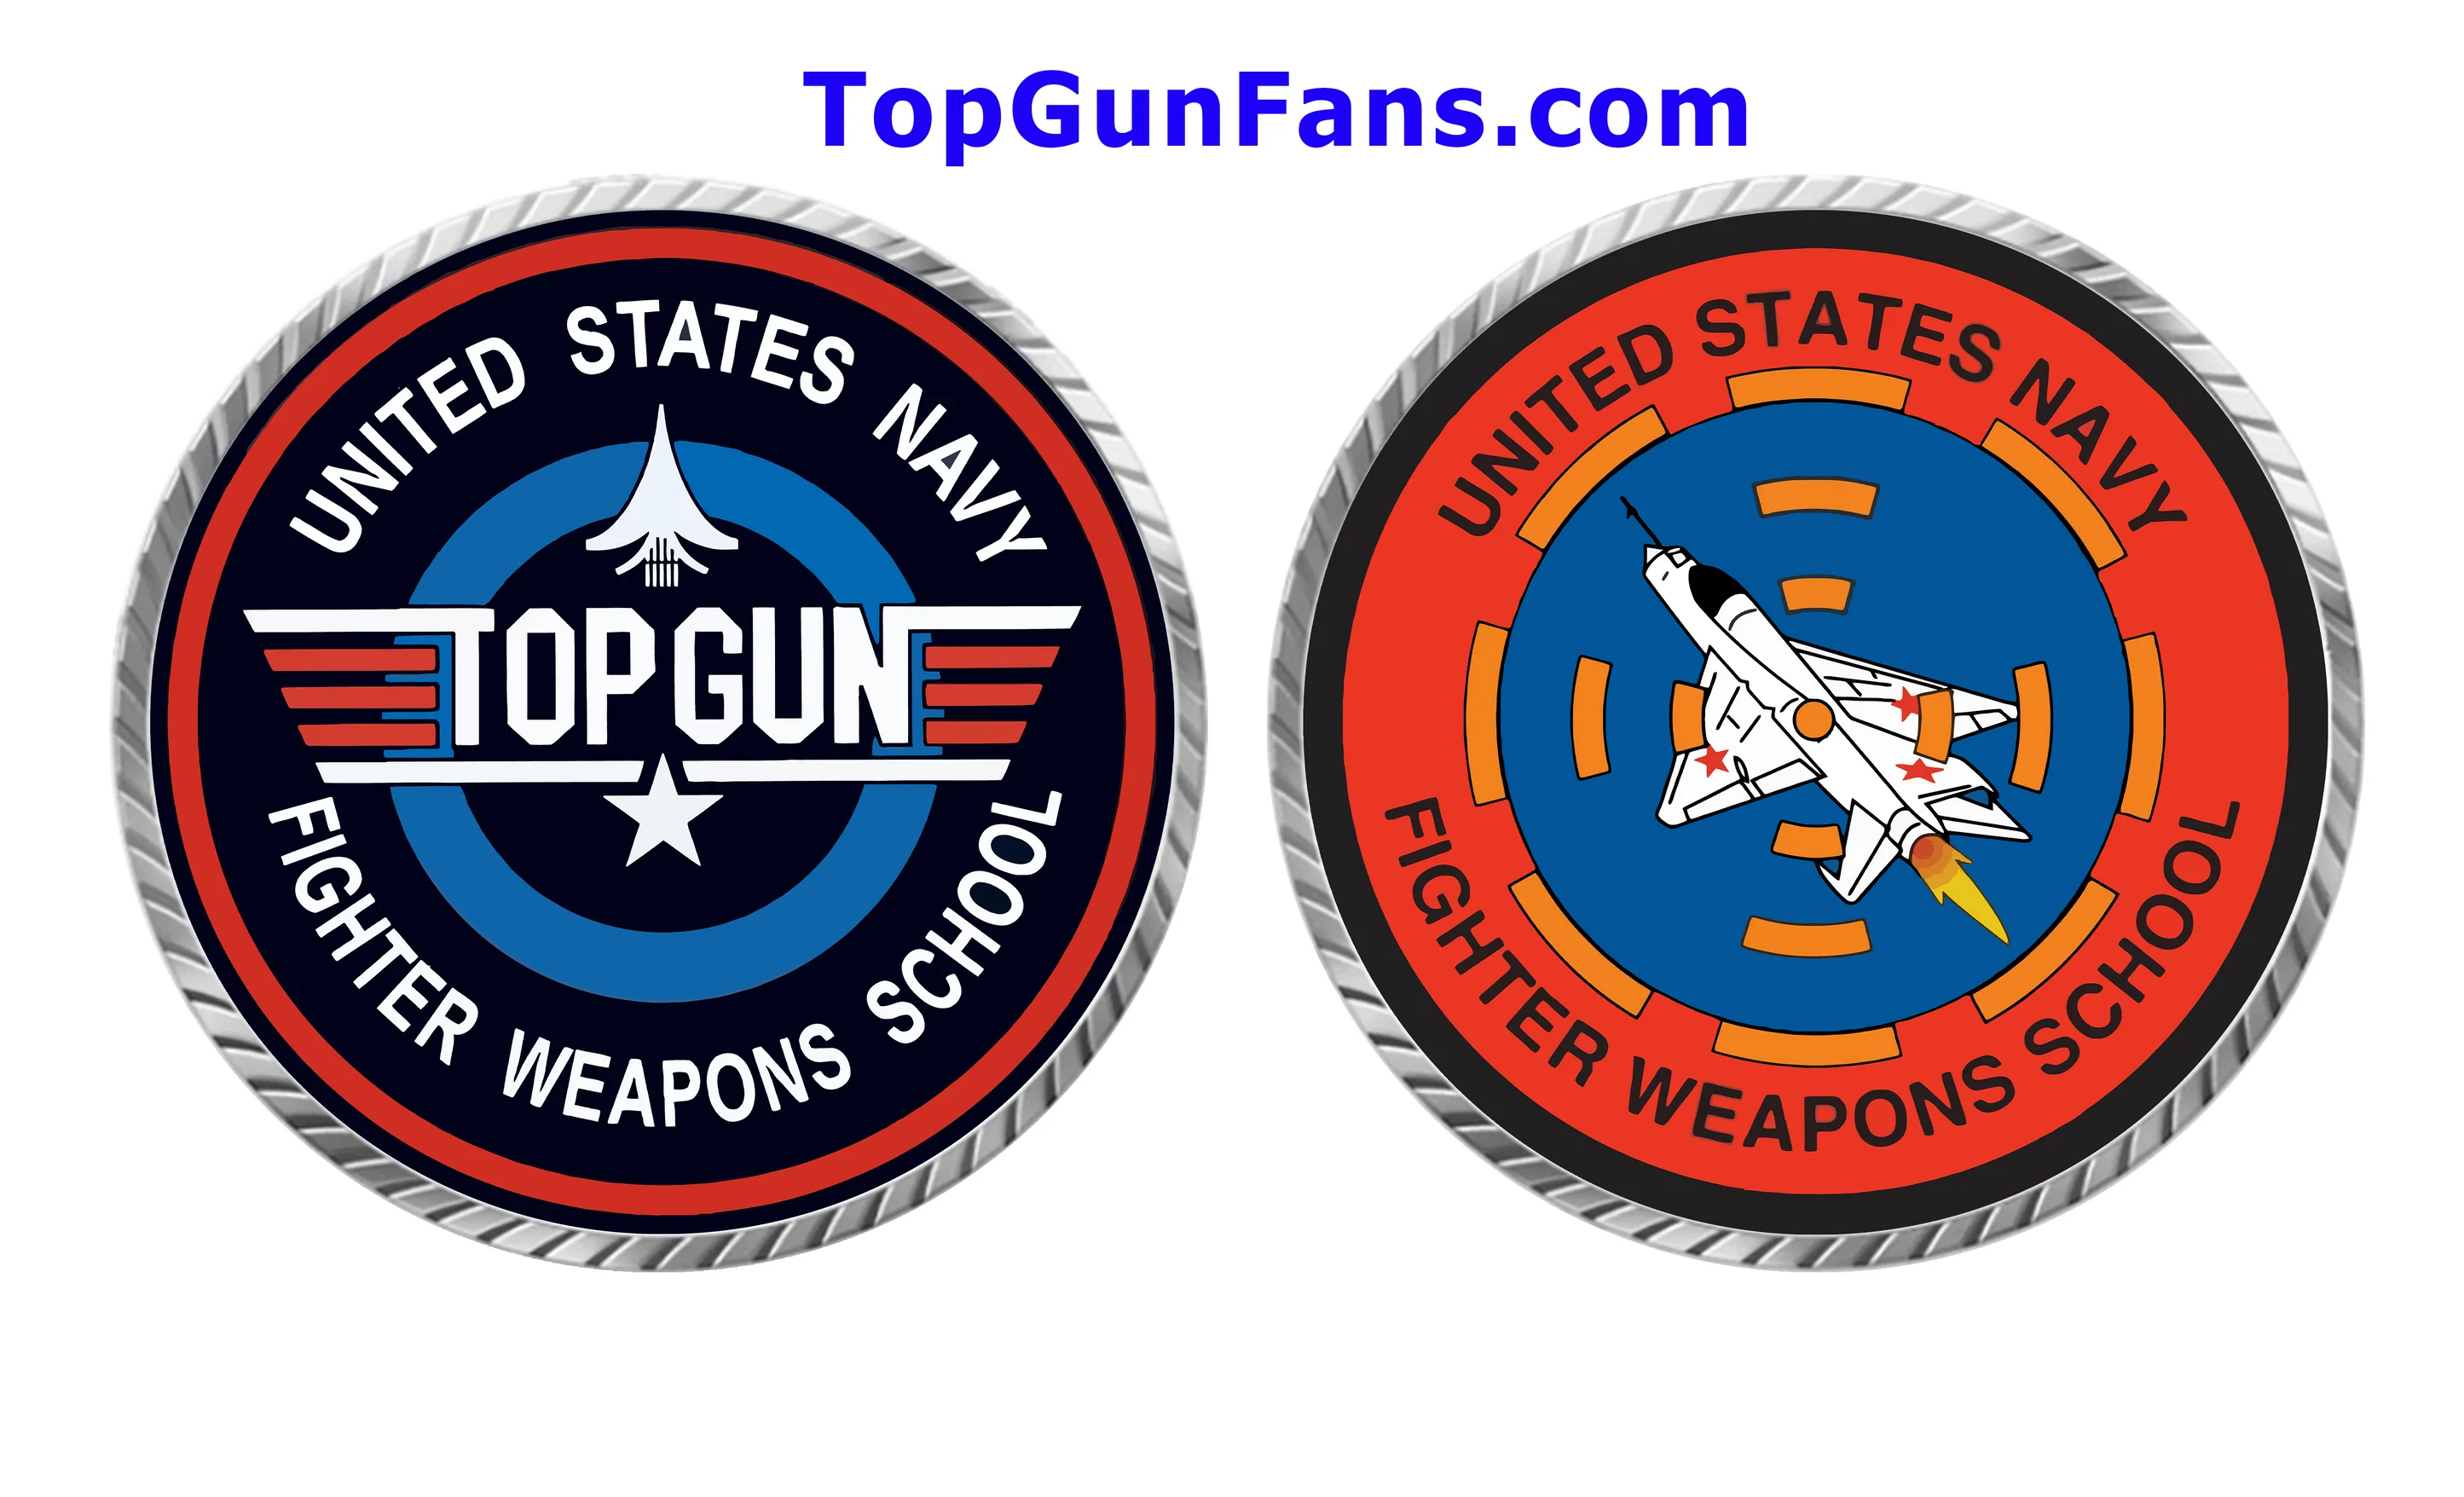 TOPGUN Challenge Coin - Production Update and Next Steps